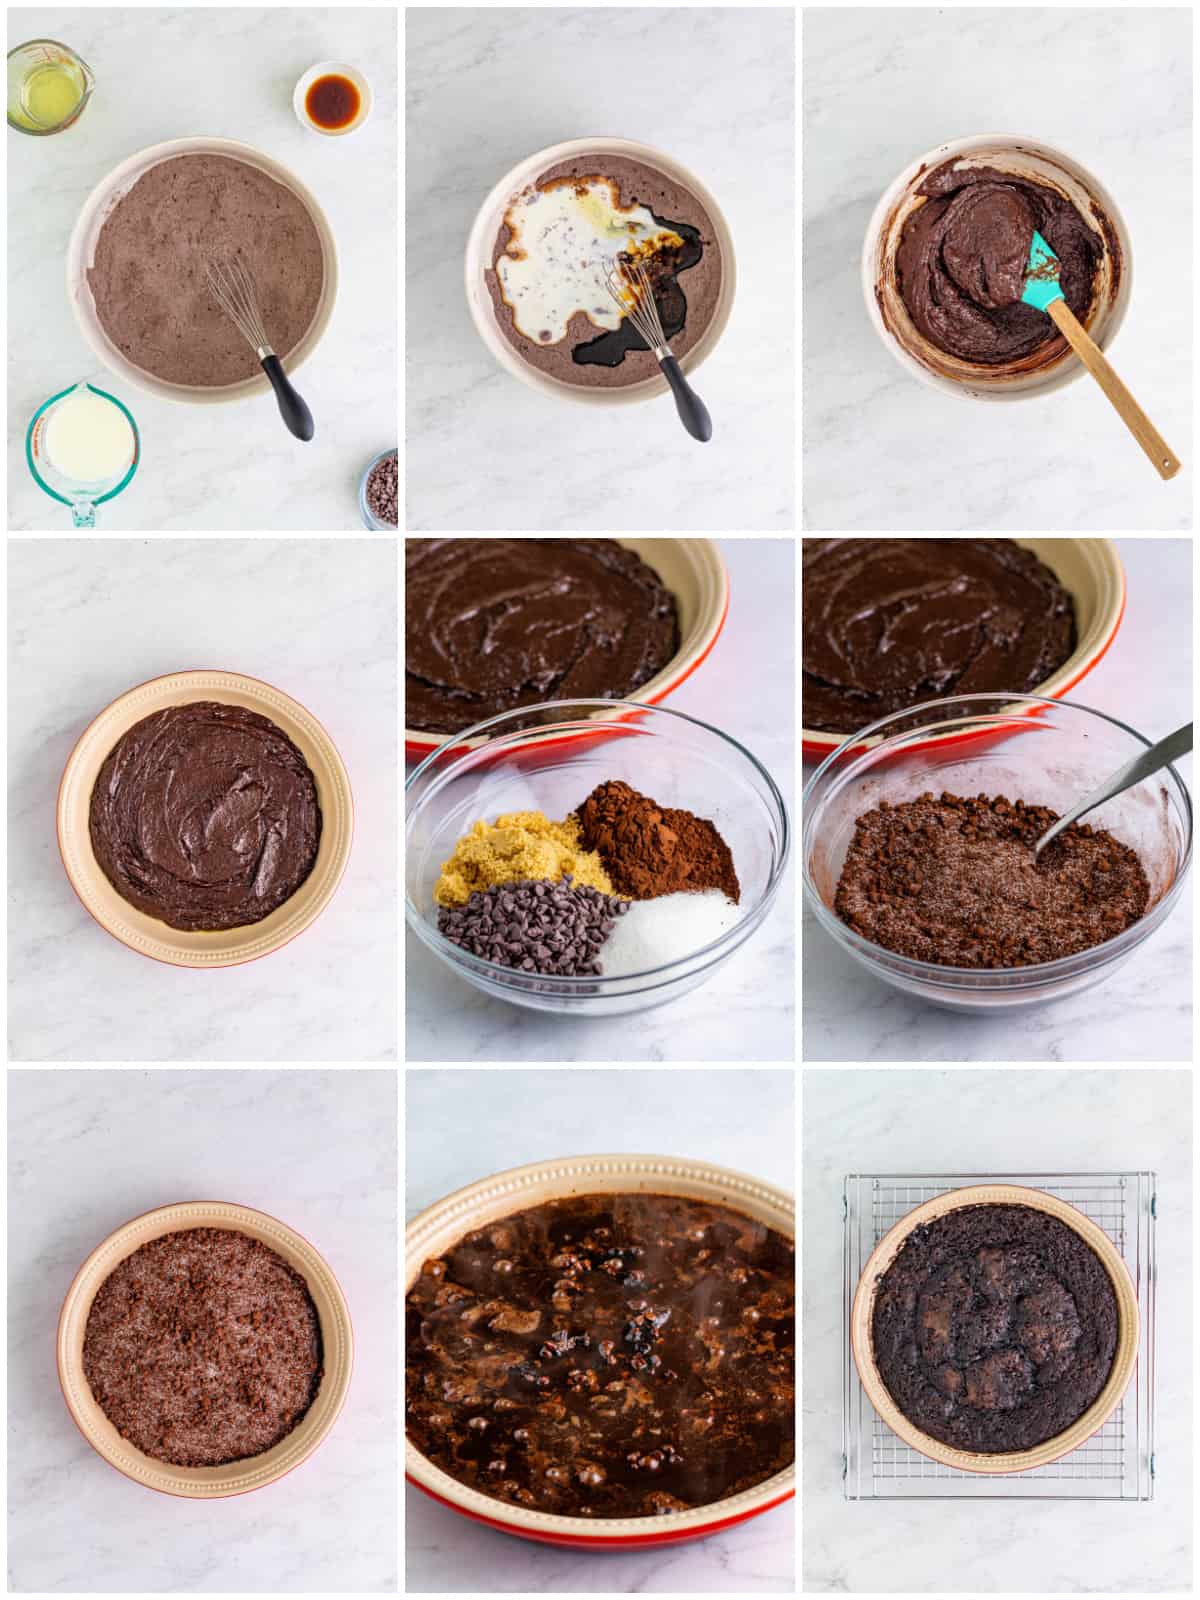 Step by step photos on how to make a Chocolate Pudding Cake.